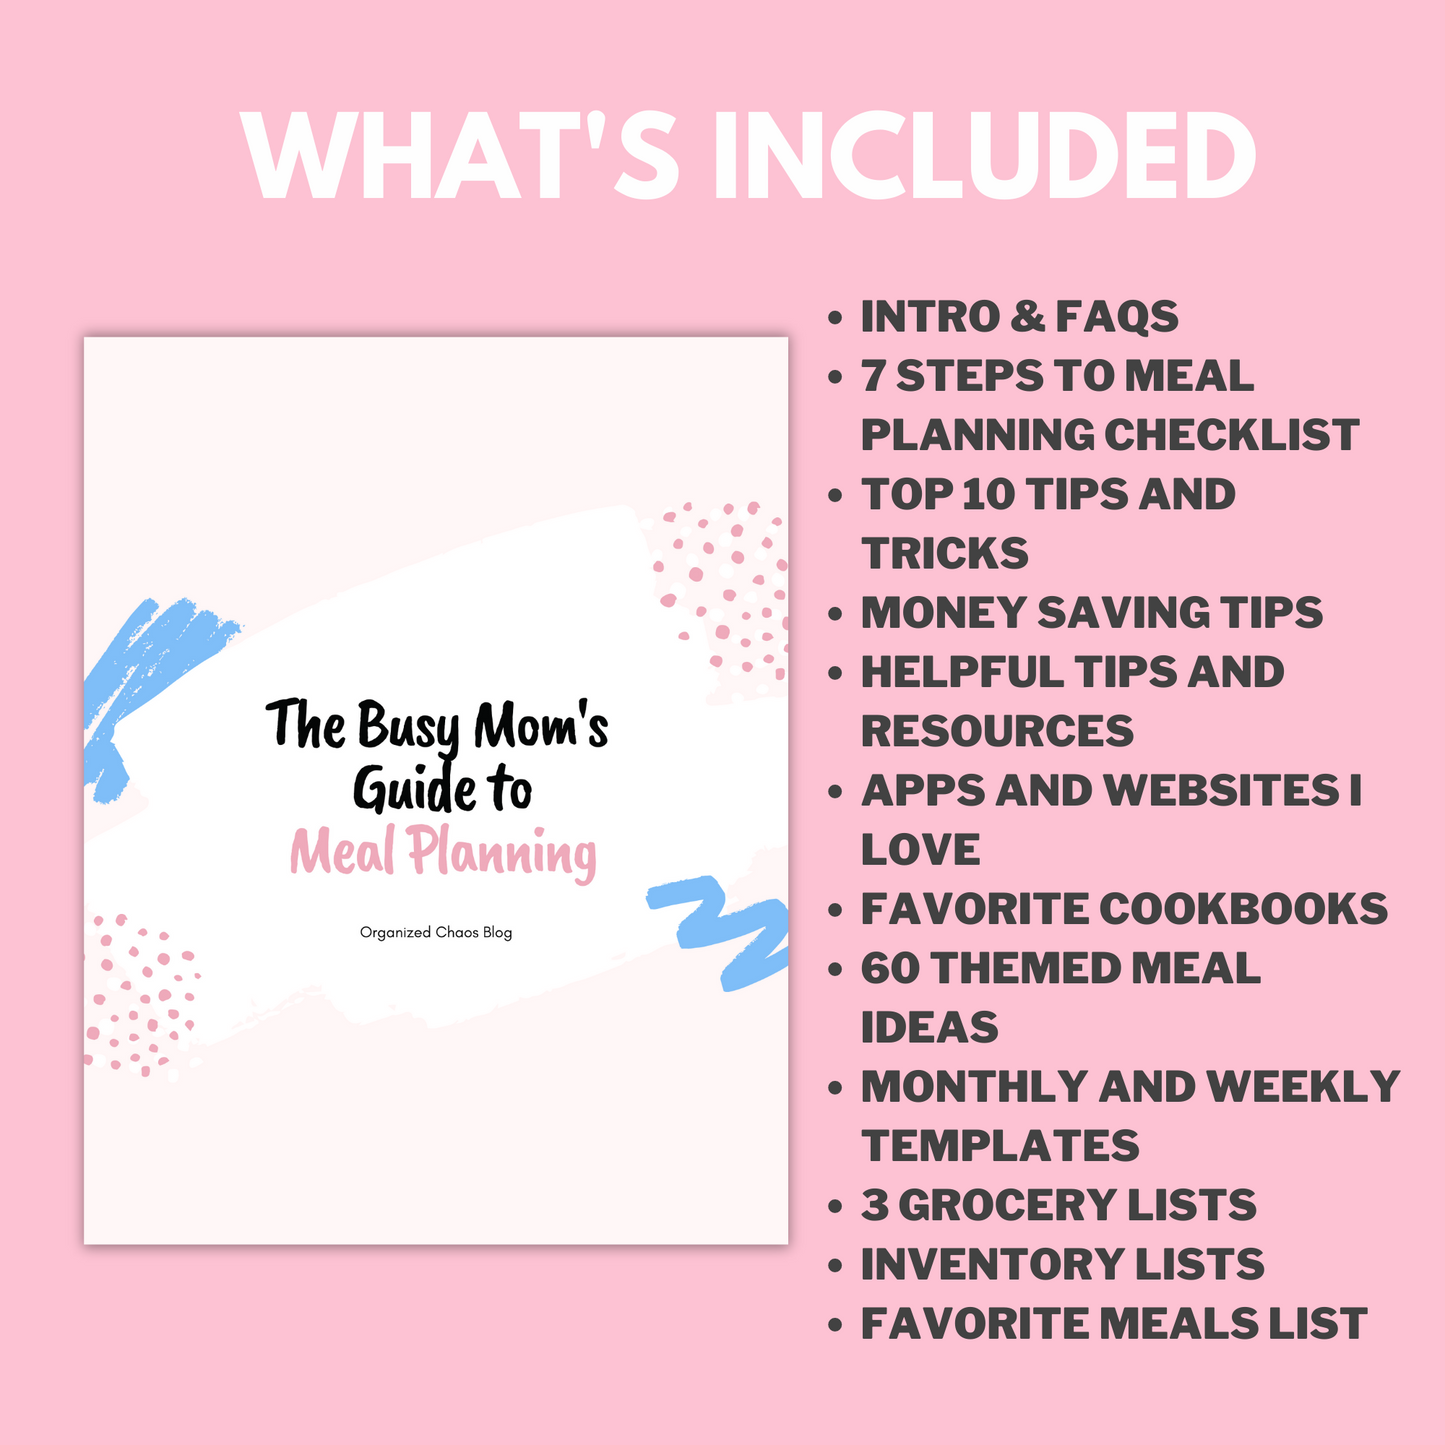 The Busy Mom's Guide to Meal Planning